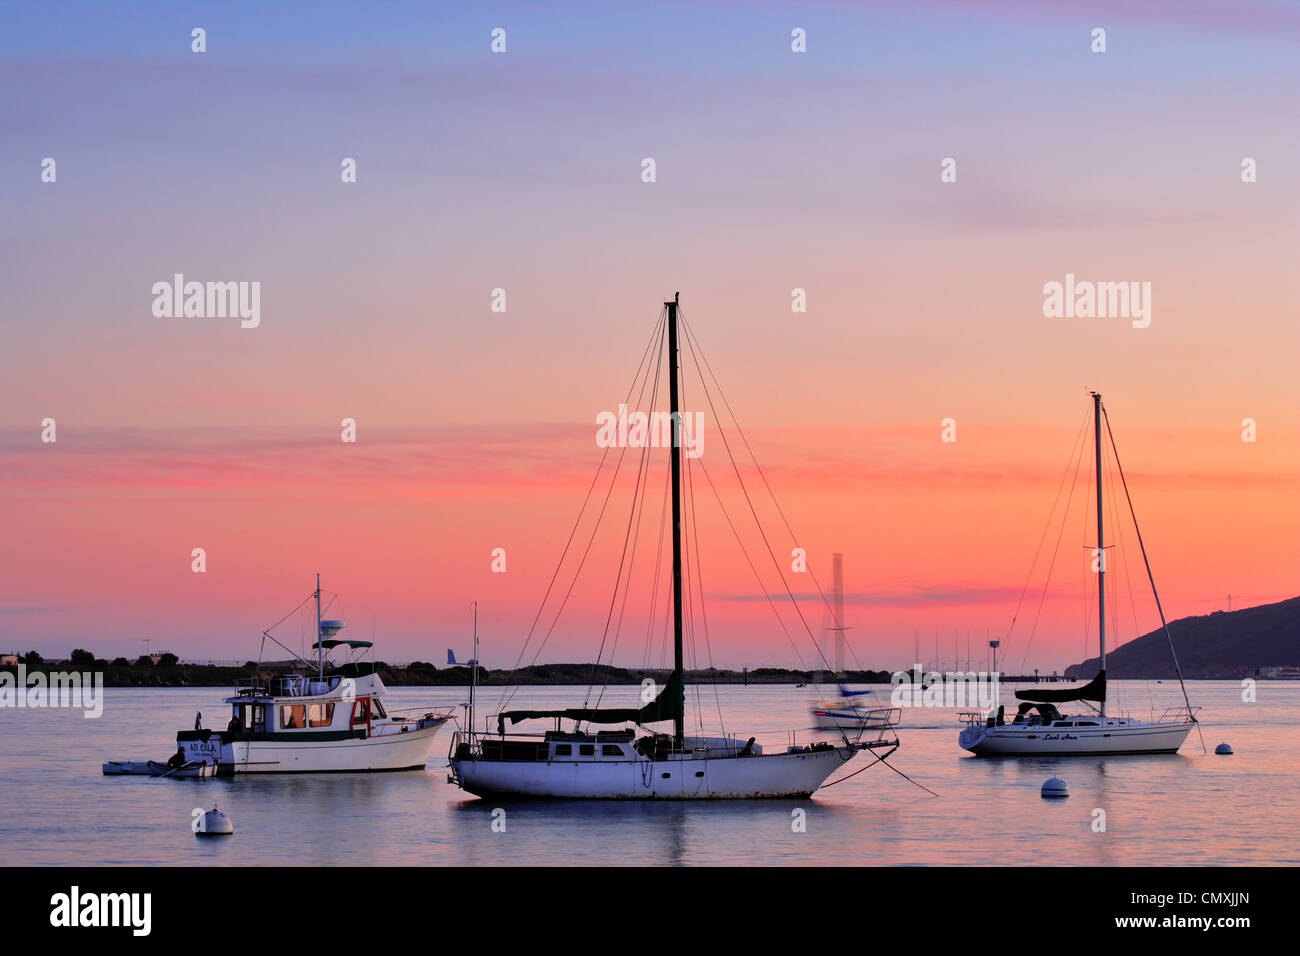 Sailboats anchored in San Diego Bay at sunset as seen from Shelter island-San Diego, California, USA. Stock Photo